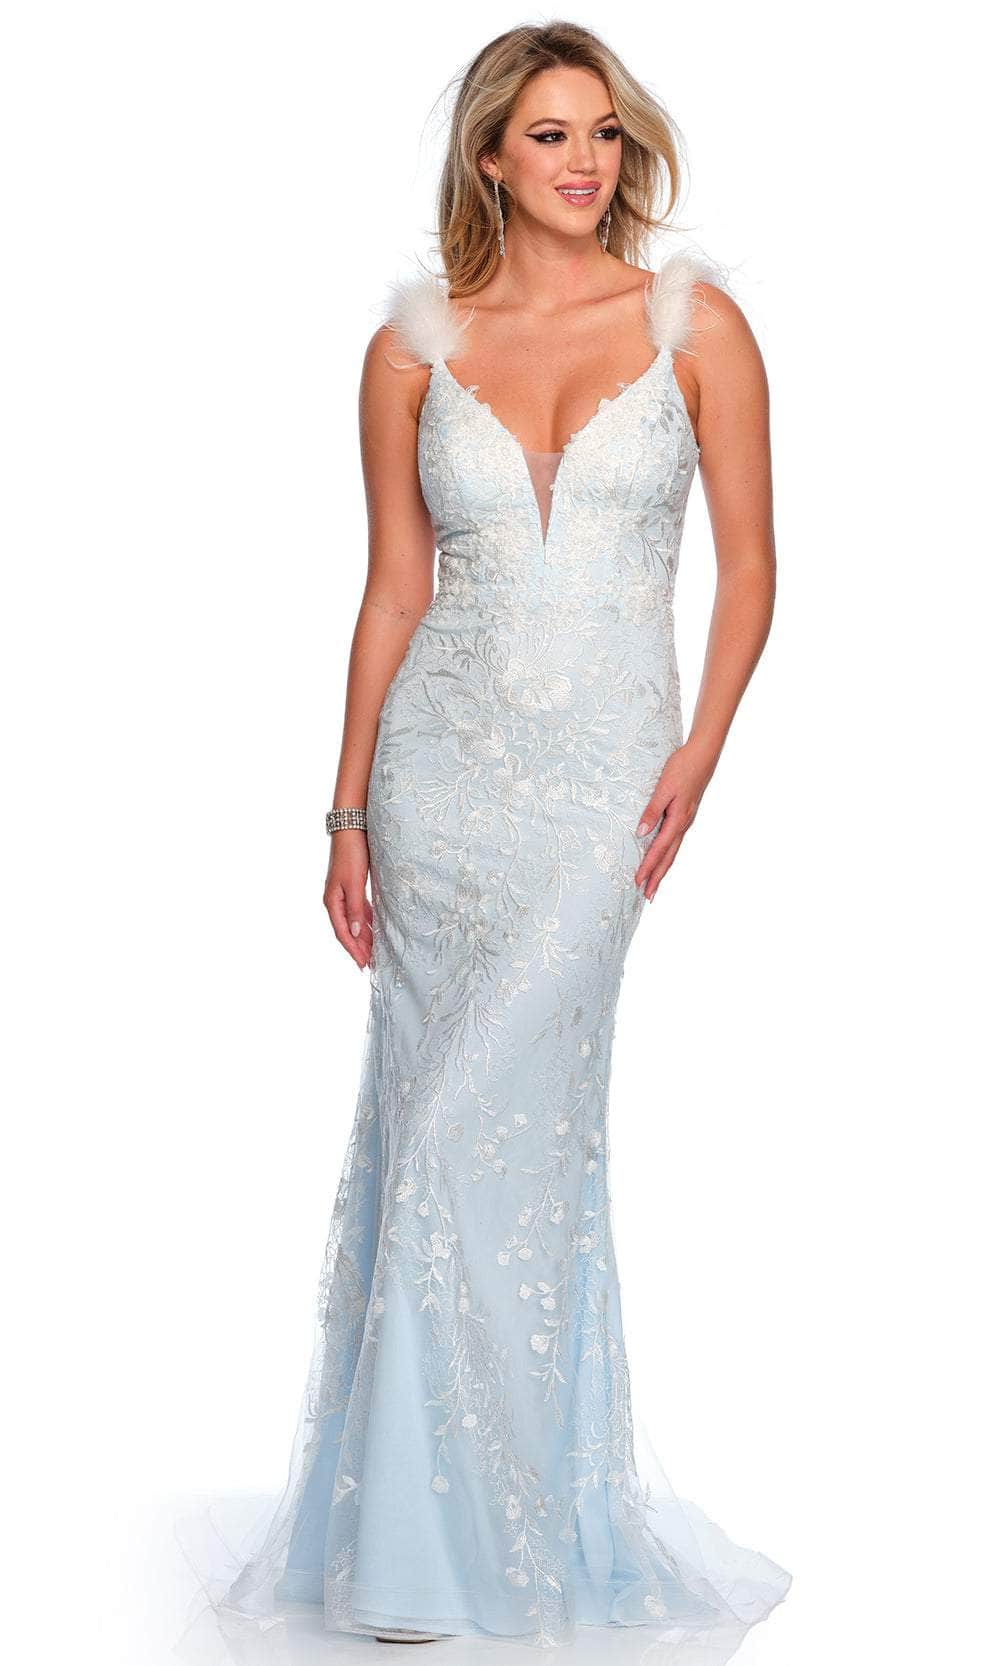 Image of Dave & Johnny 11459 - Embroidered Feather Detailed Prom Gown